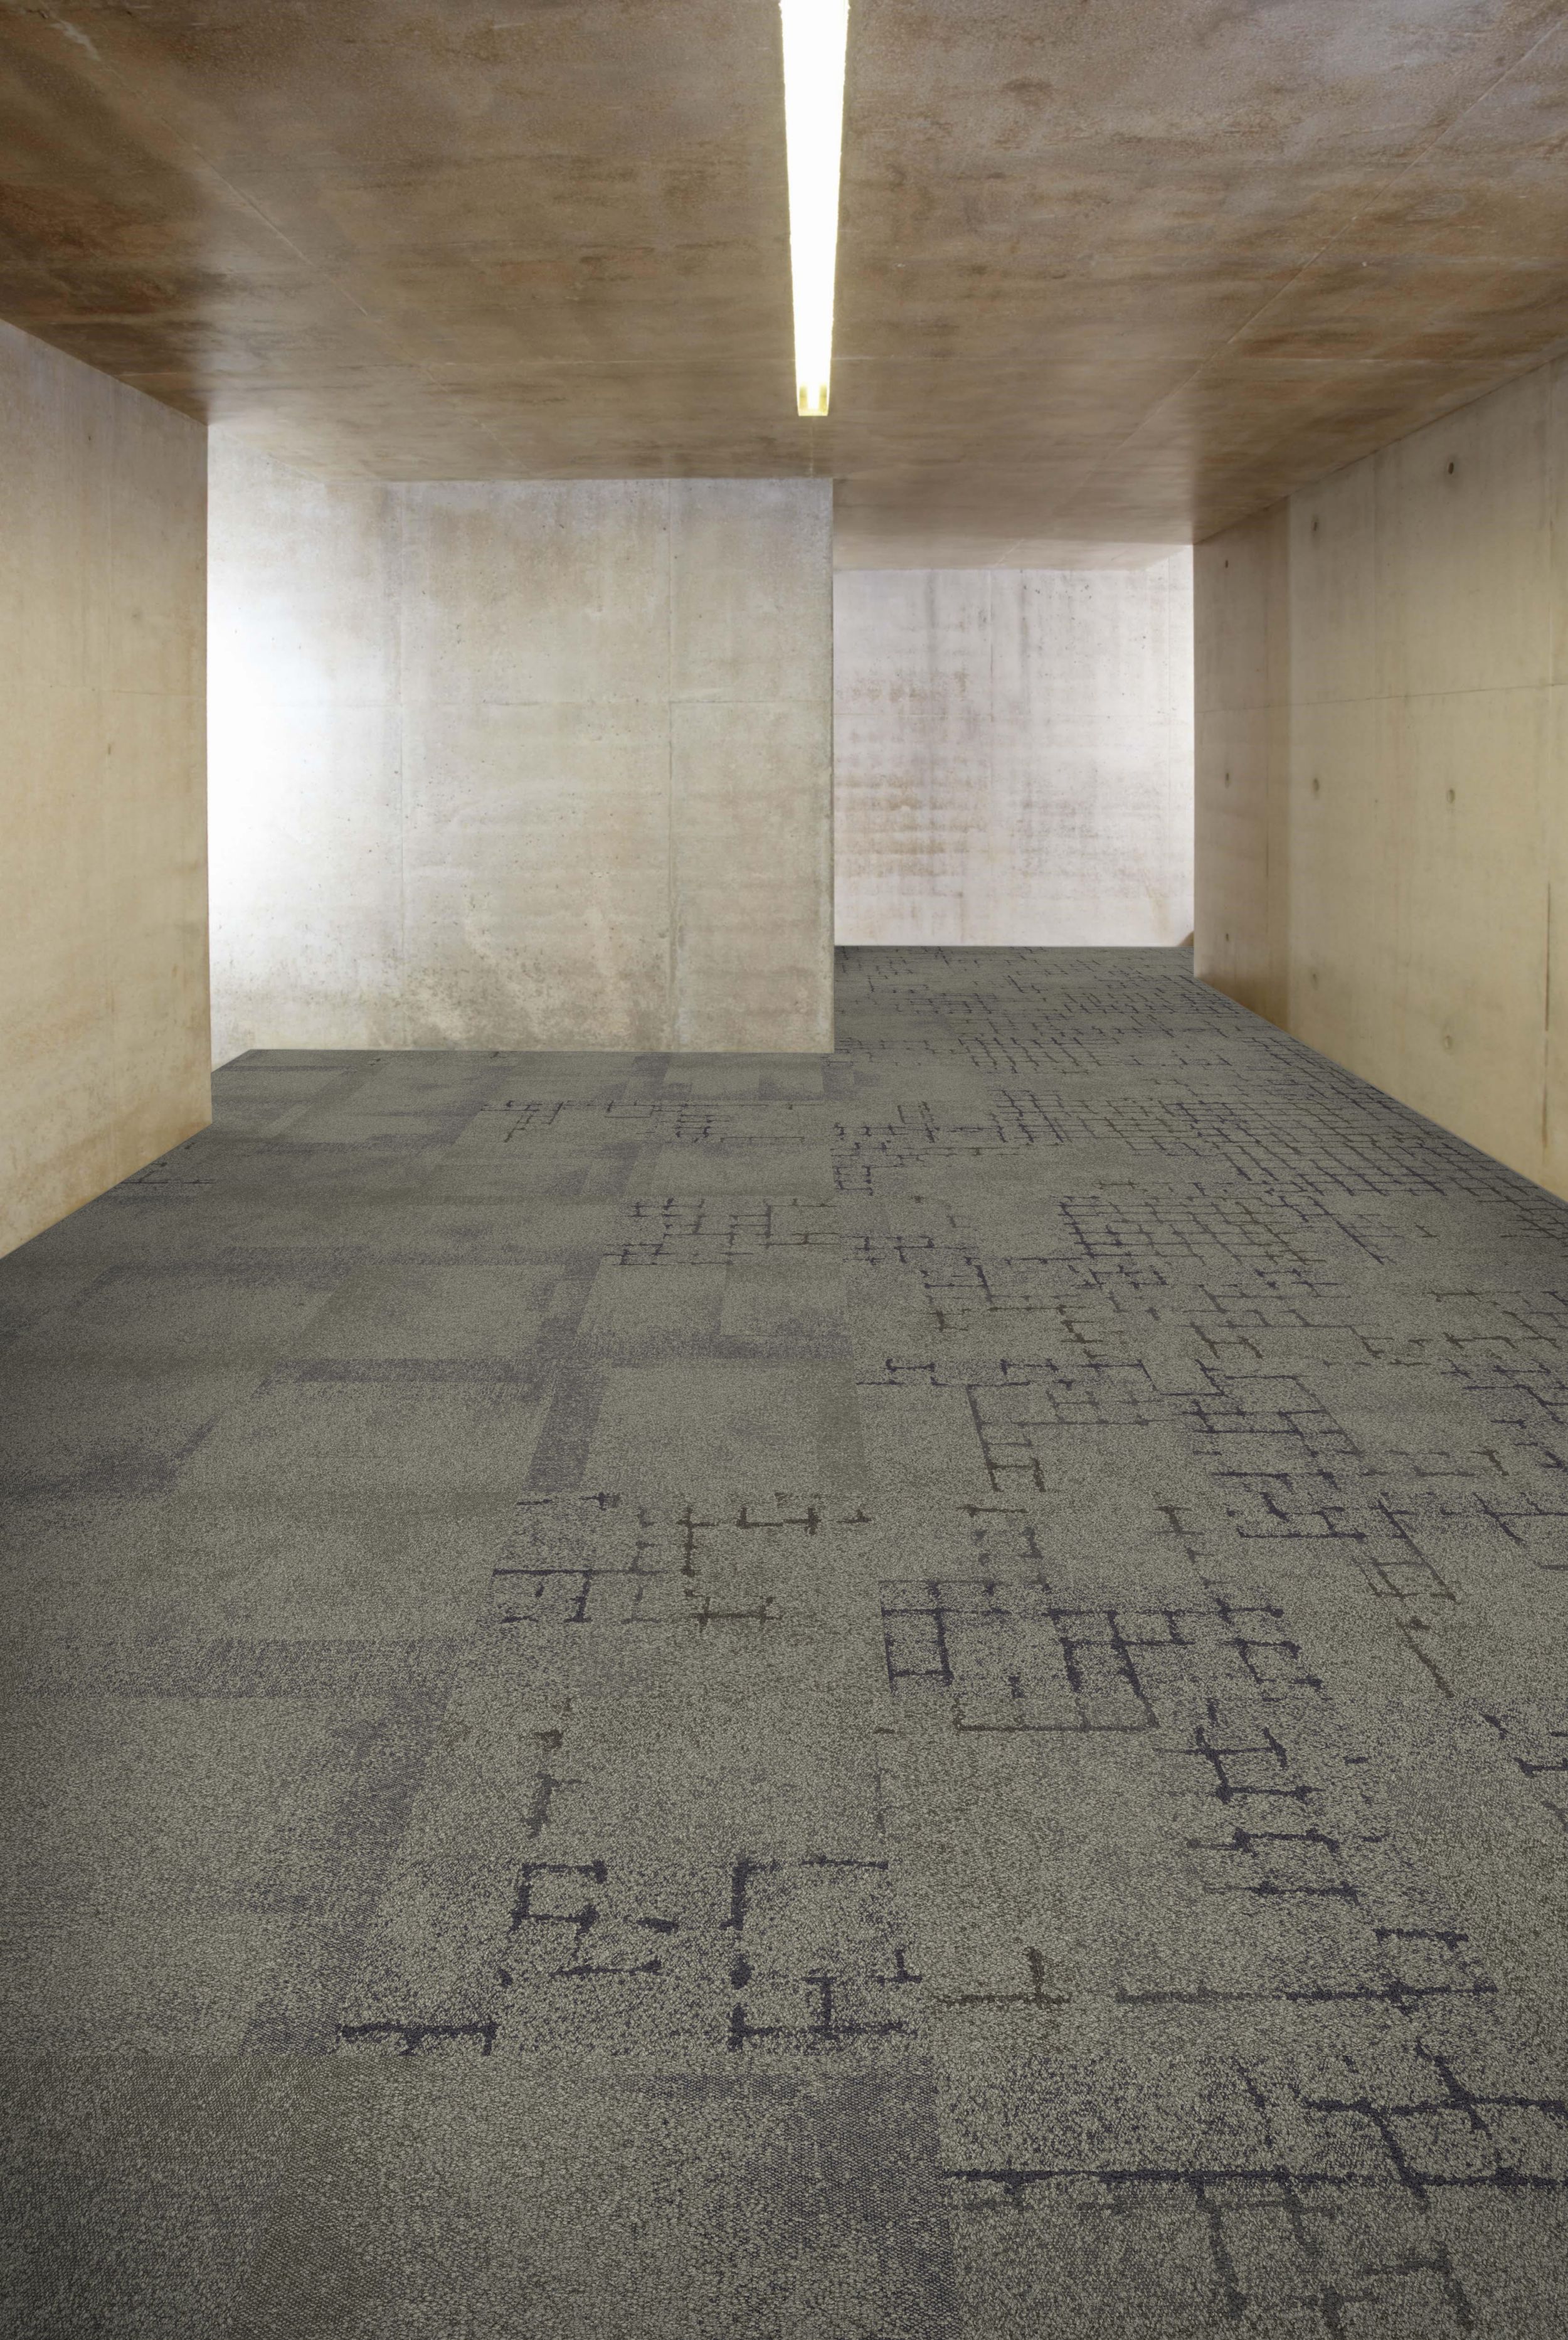 Interface Flagstone, Kerbstone and Sett in Stone carpet tile in corridor with concrete walls and ceiling numéro d’image 6